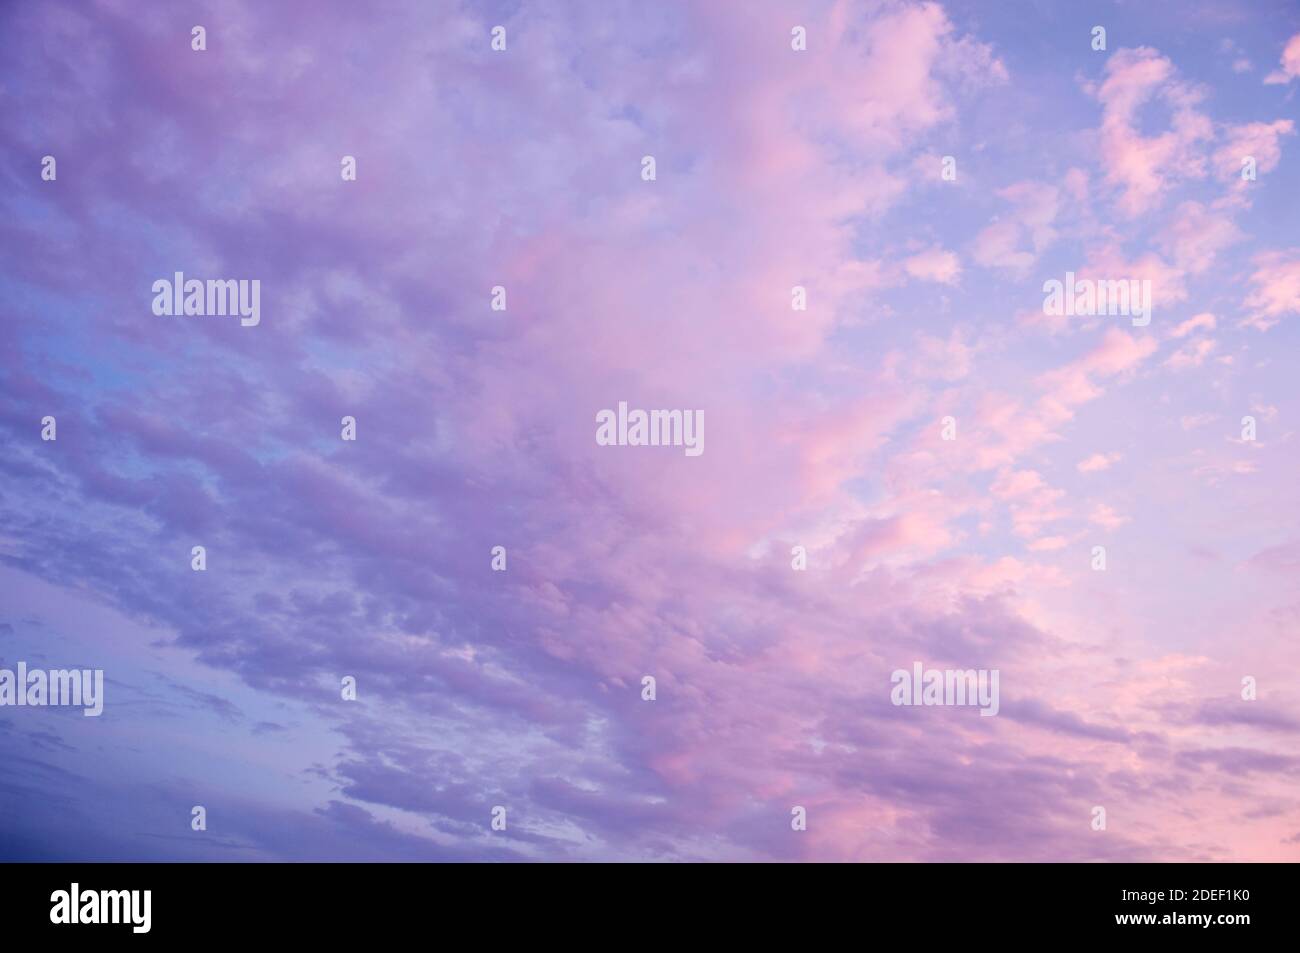 Beautiful blue sky background. Soft white clouds at sunset. Many pink, magenta and orange tones and patterns of clouds. Stock Photo